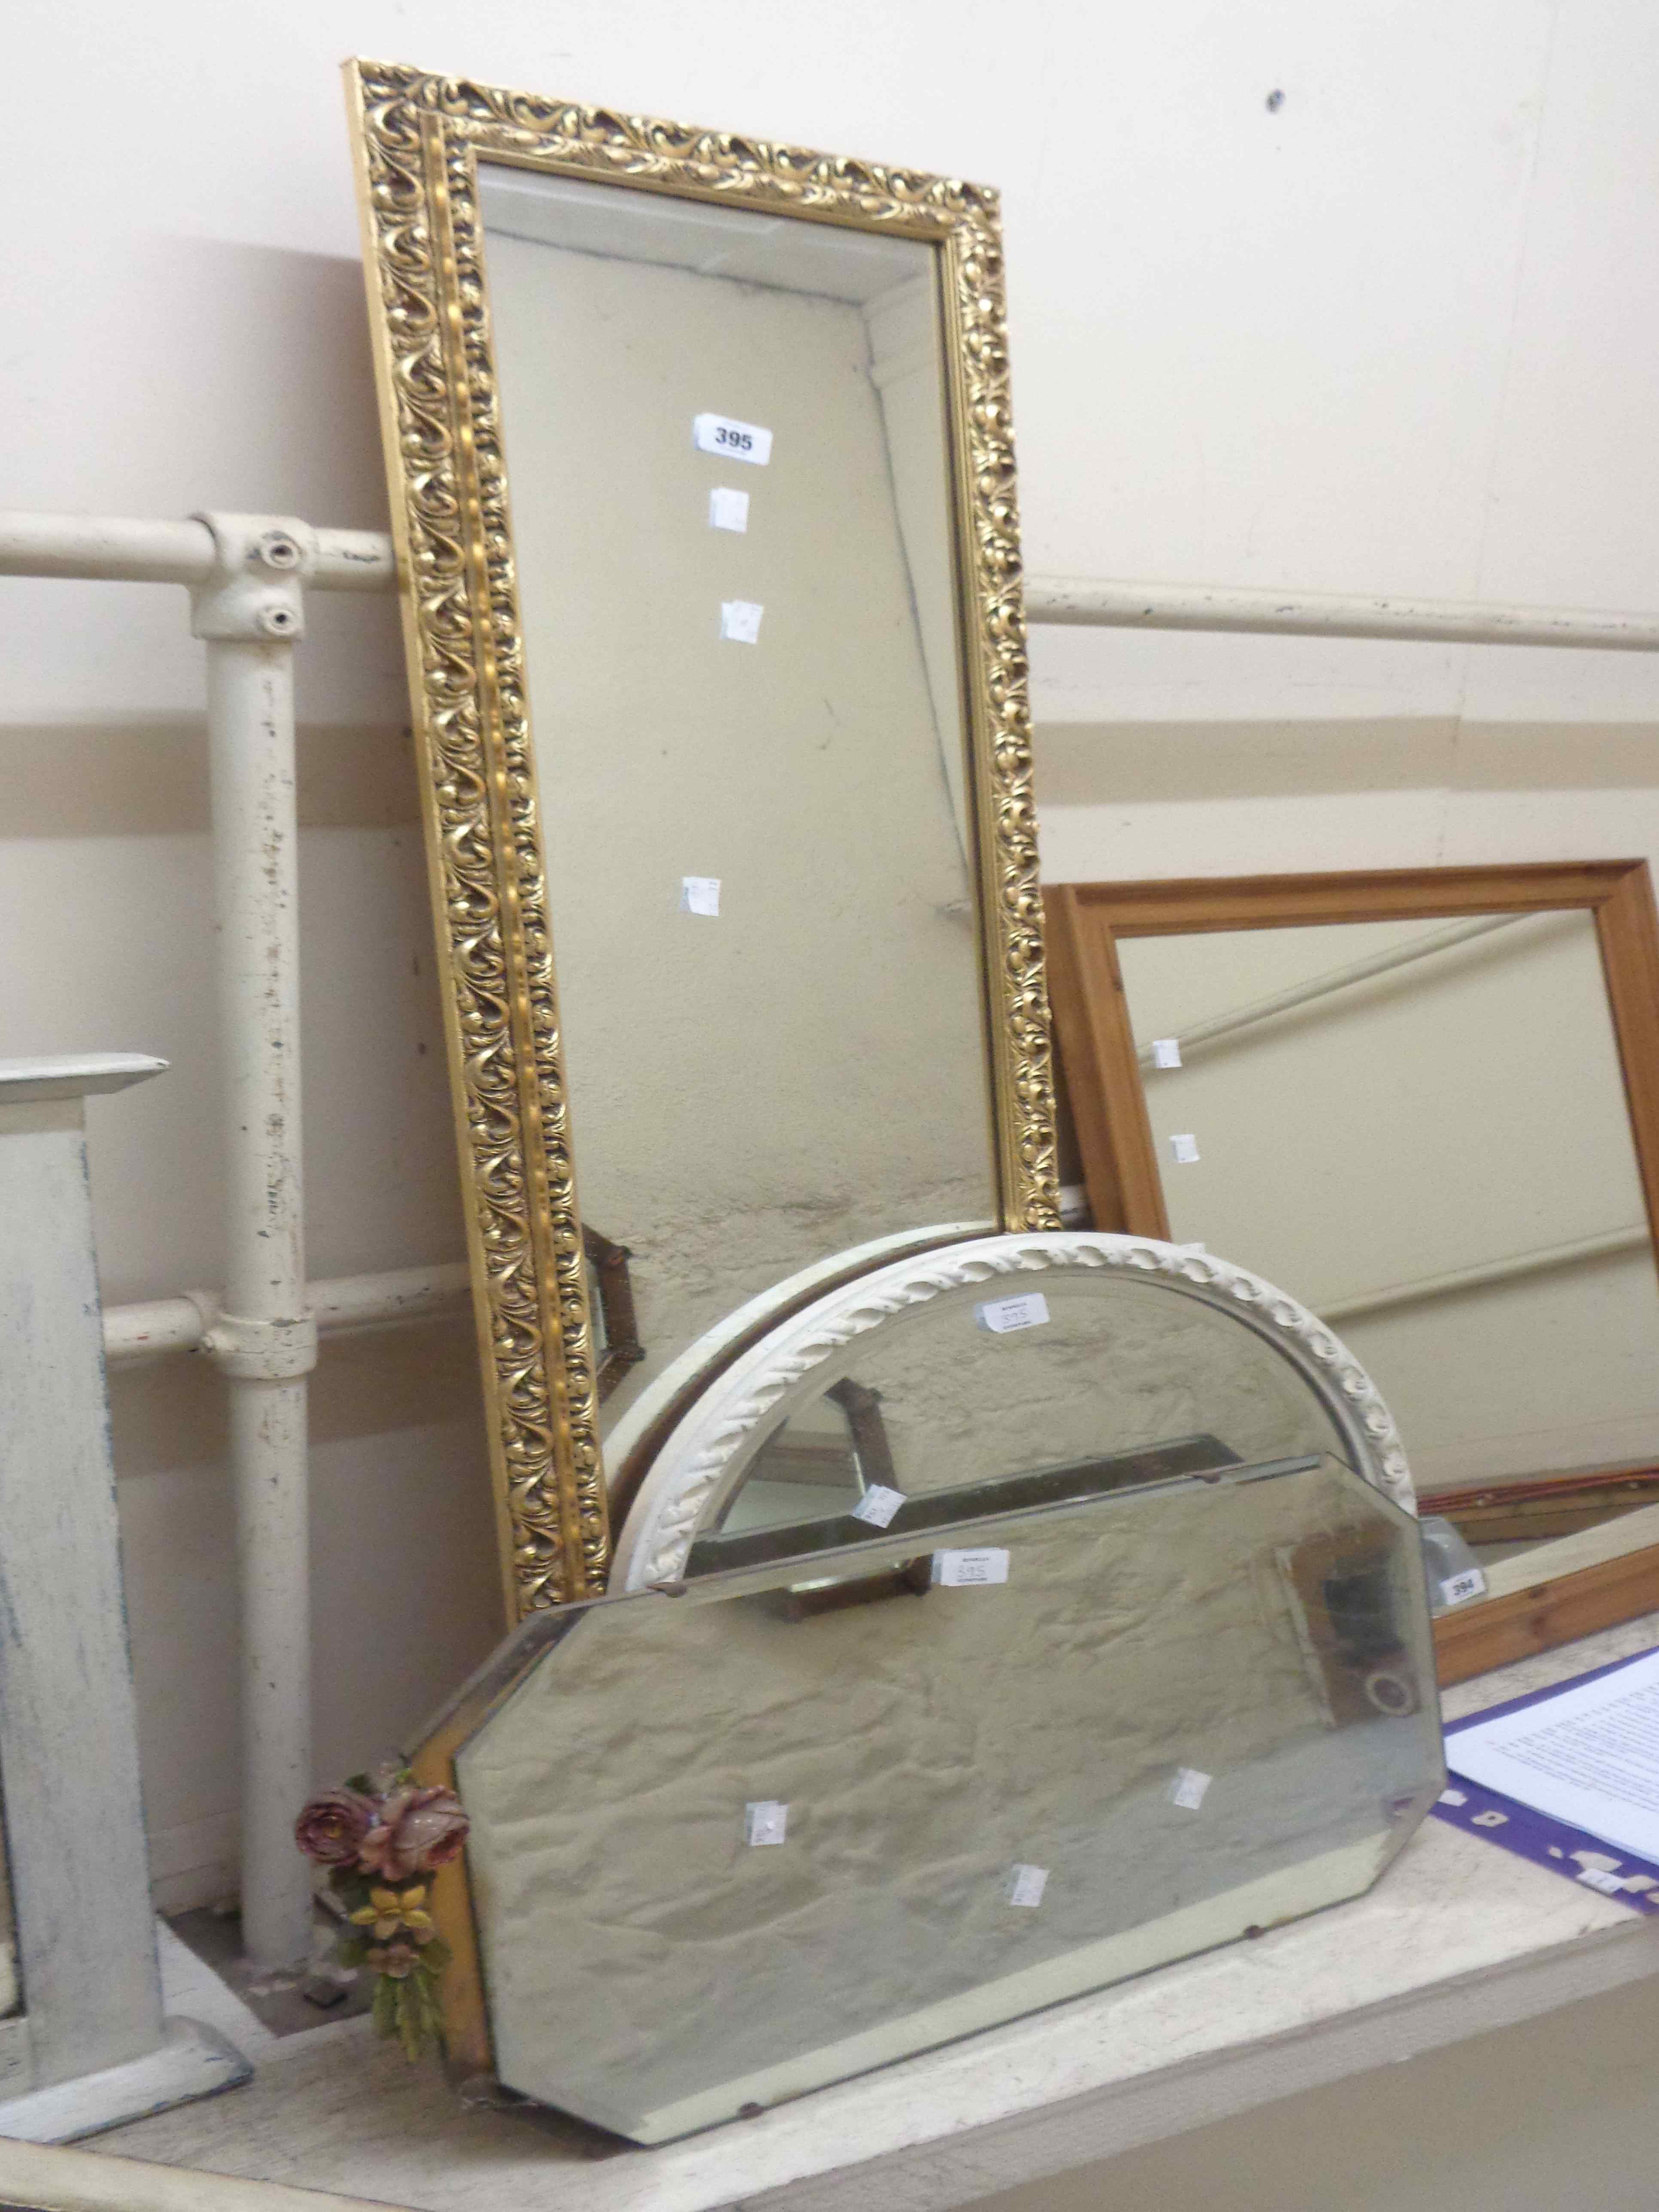 A modern gilt framed narrow oblong wall mirror - sold with a white painted framed circular mirror